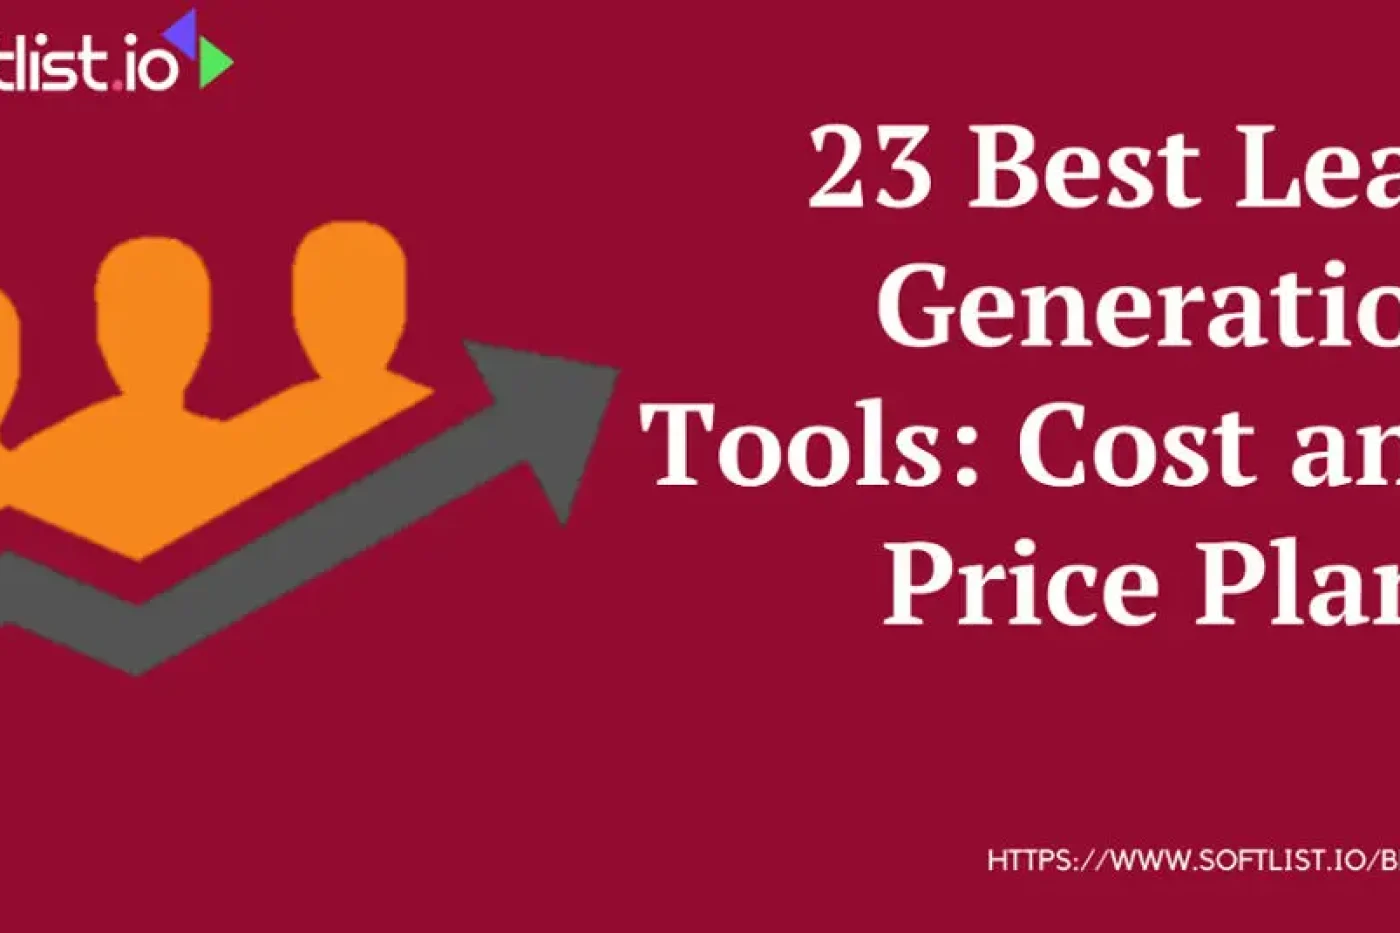 23 Best Lead Generation Tools: Cost and Price Plans